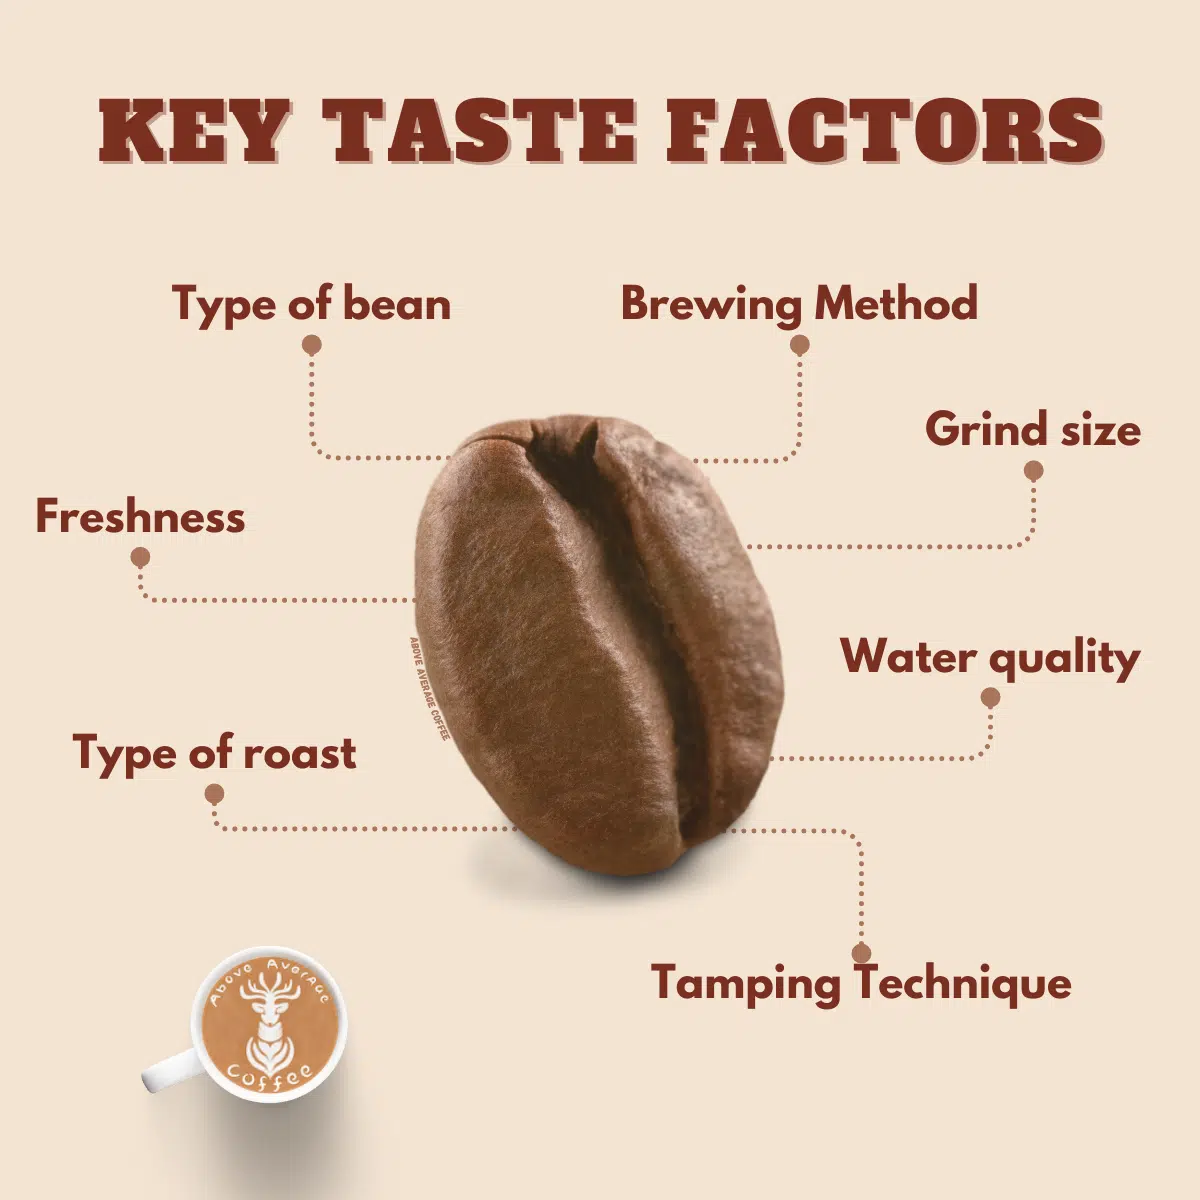 Graphic of a coffee bean that is showing the key factors that affect the taste of your coffee.